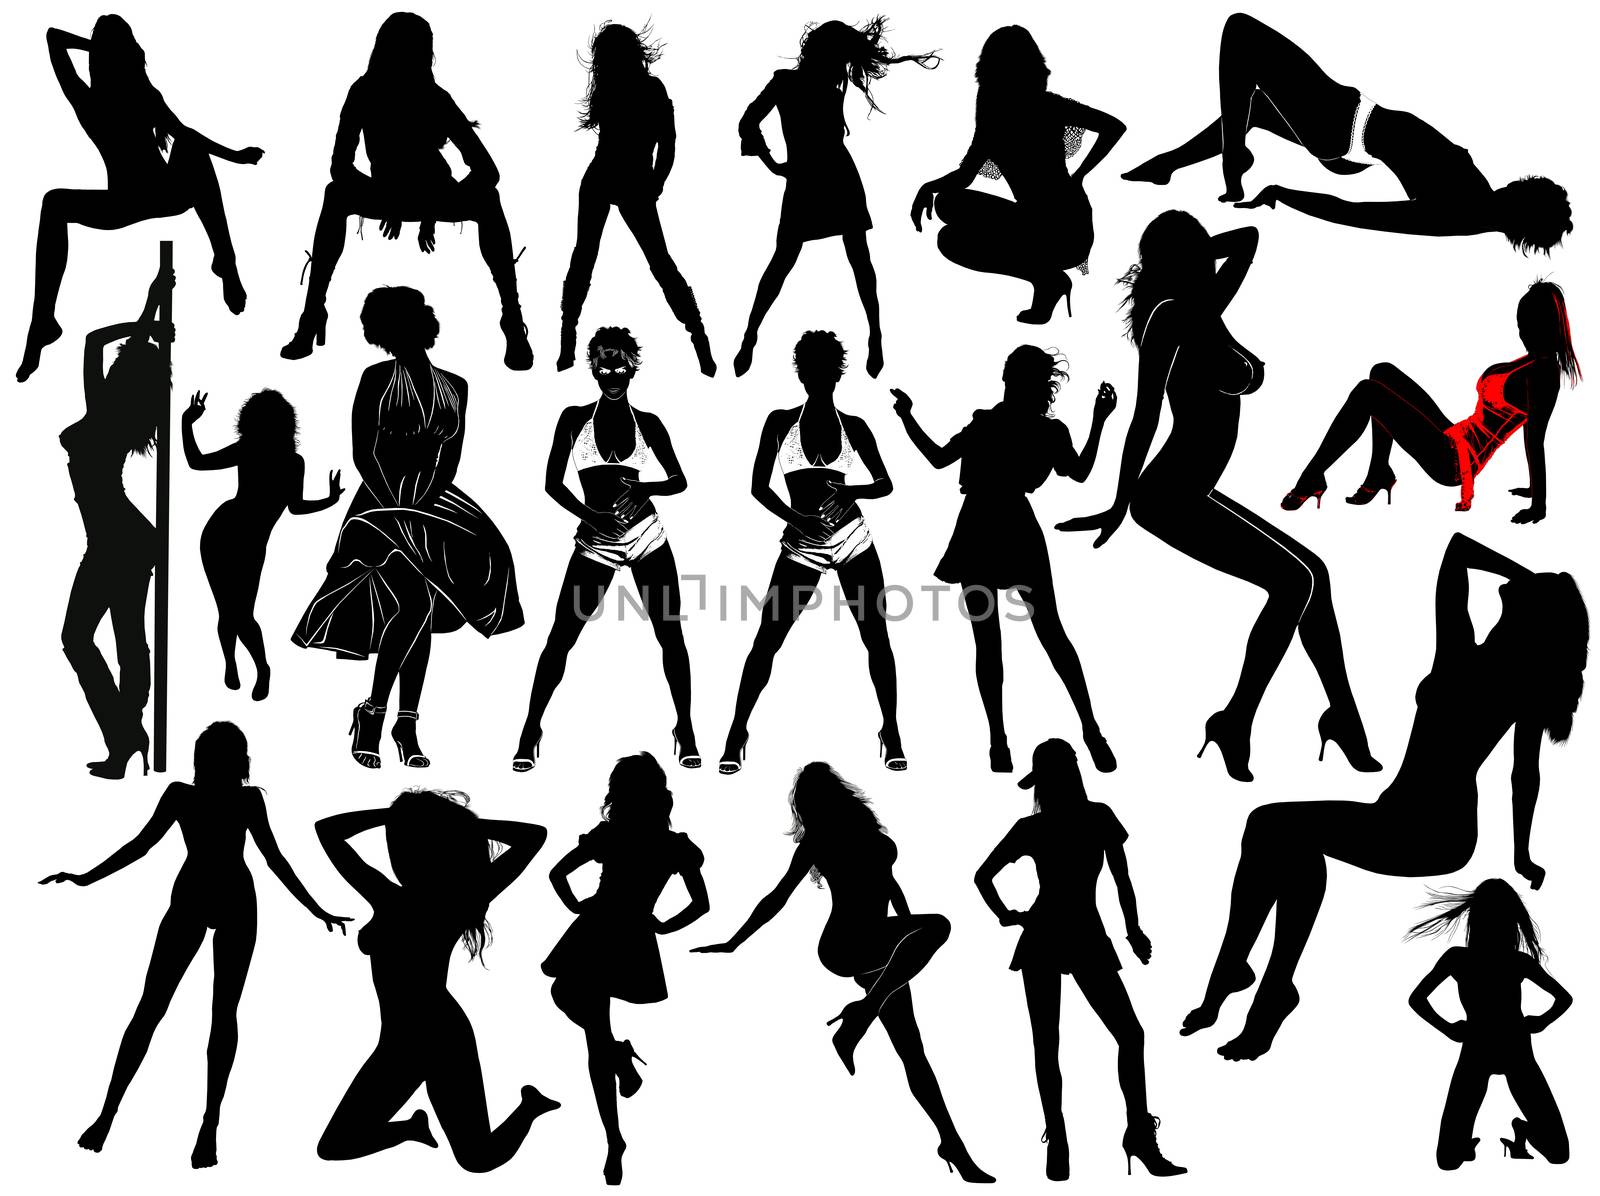 Twenty one silhouettes of sexual young women